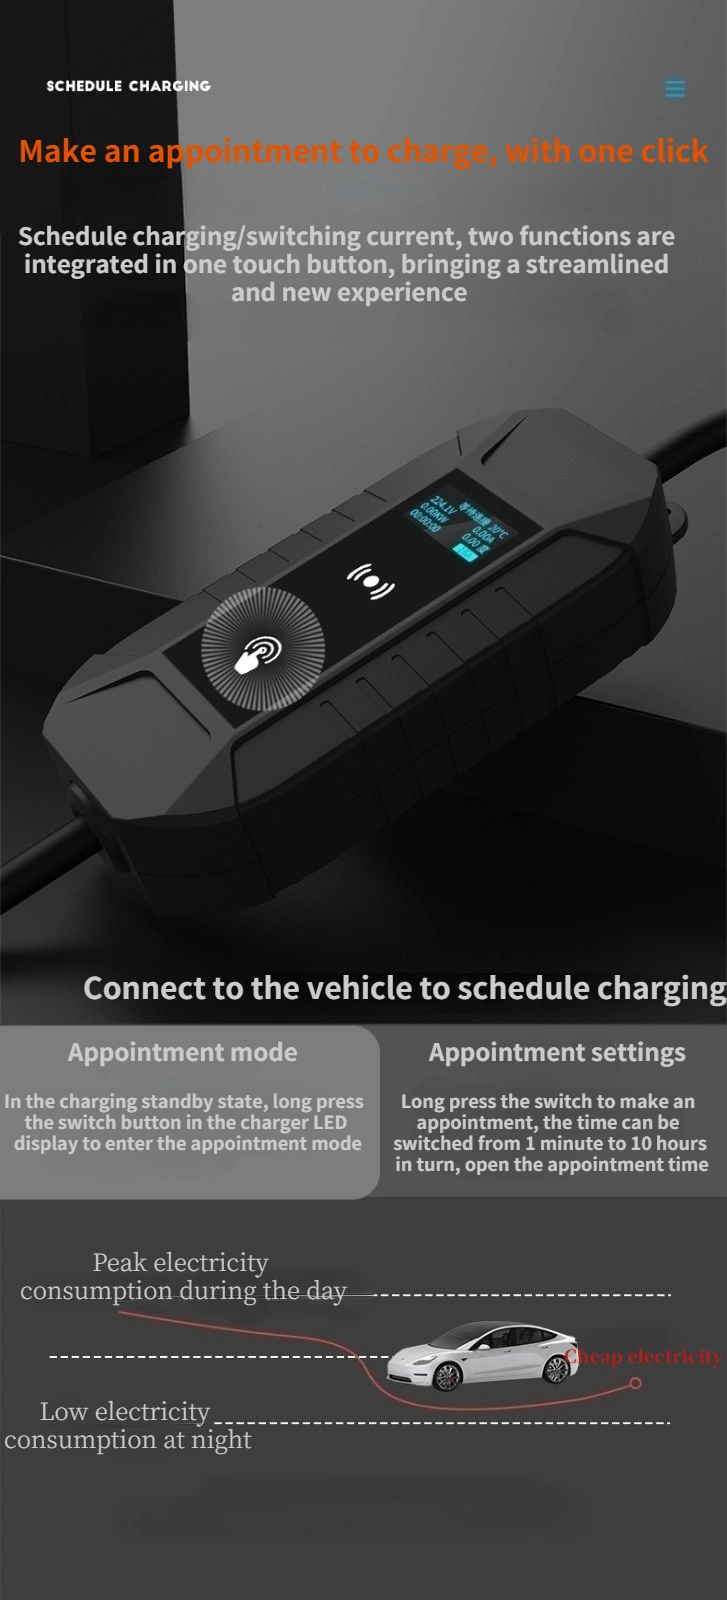 Portable Mode 2 3.5 Kw 16A EV Car Charging Station Level 2 AC EV Car Battery Chargers